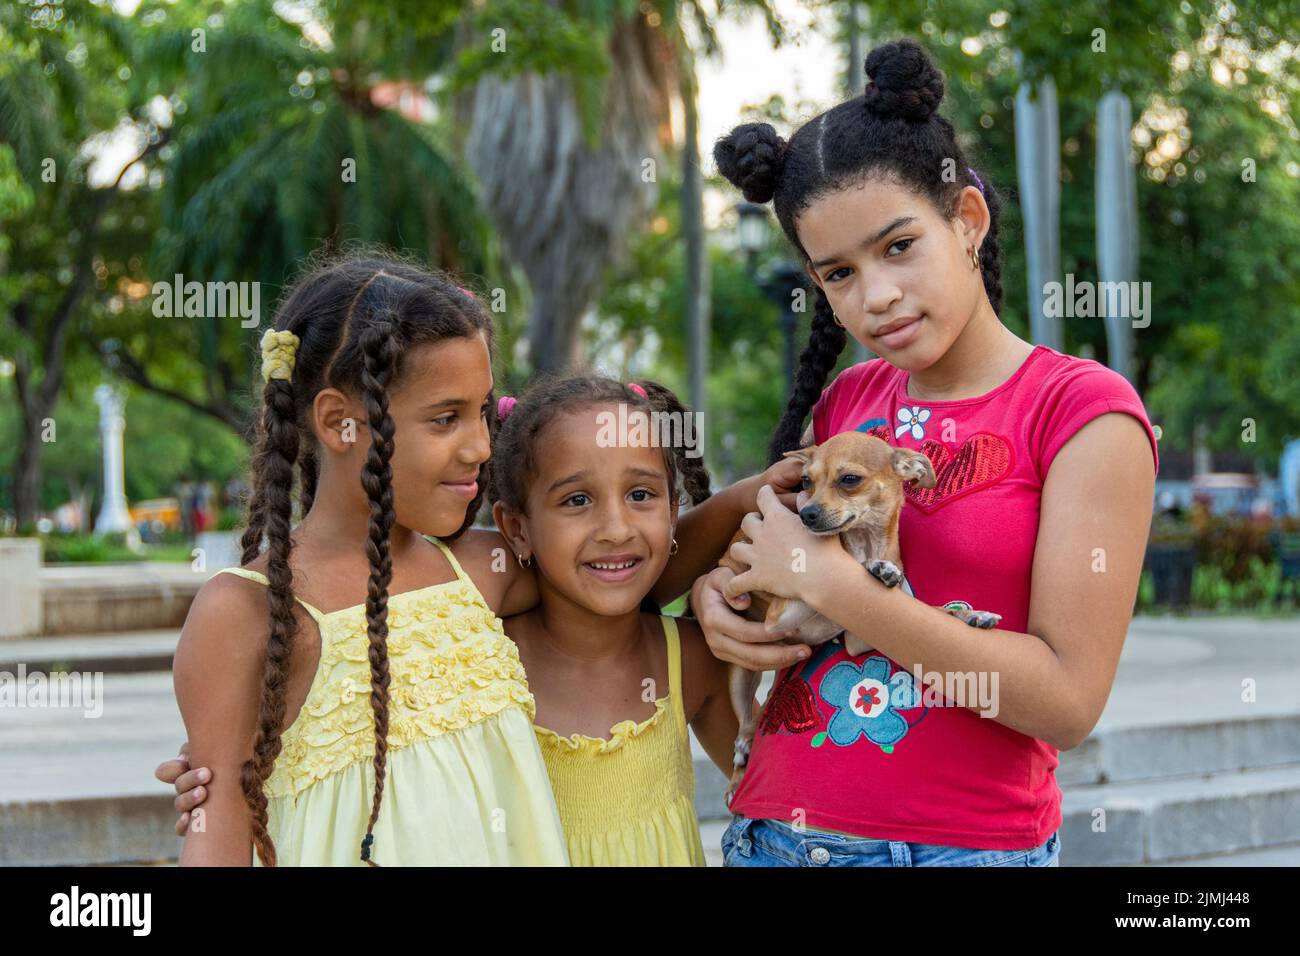 Three young Cuban girls, all sisters, pose with their little Chihuahua dog, in Havana, Cuba. Stock Photo